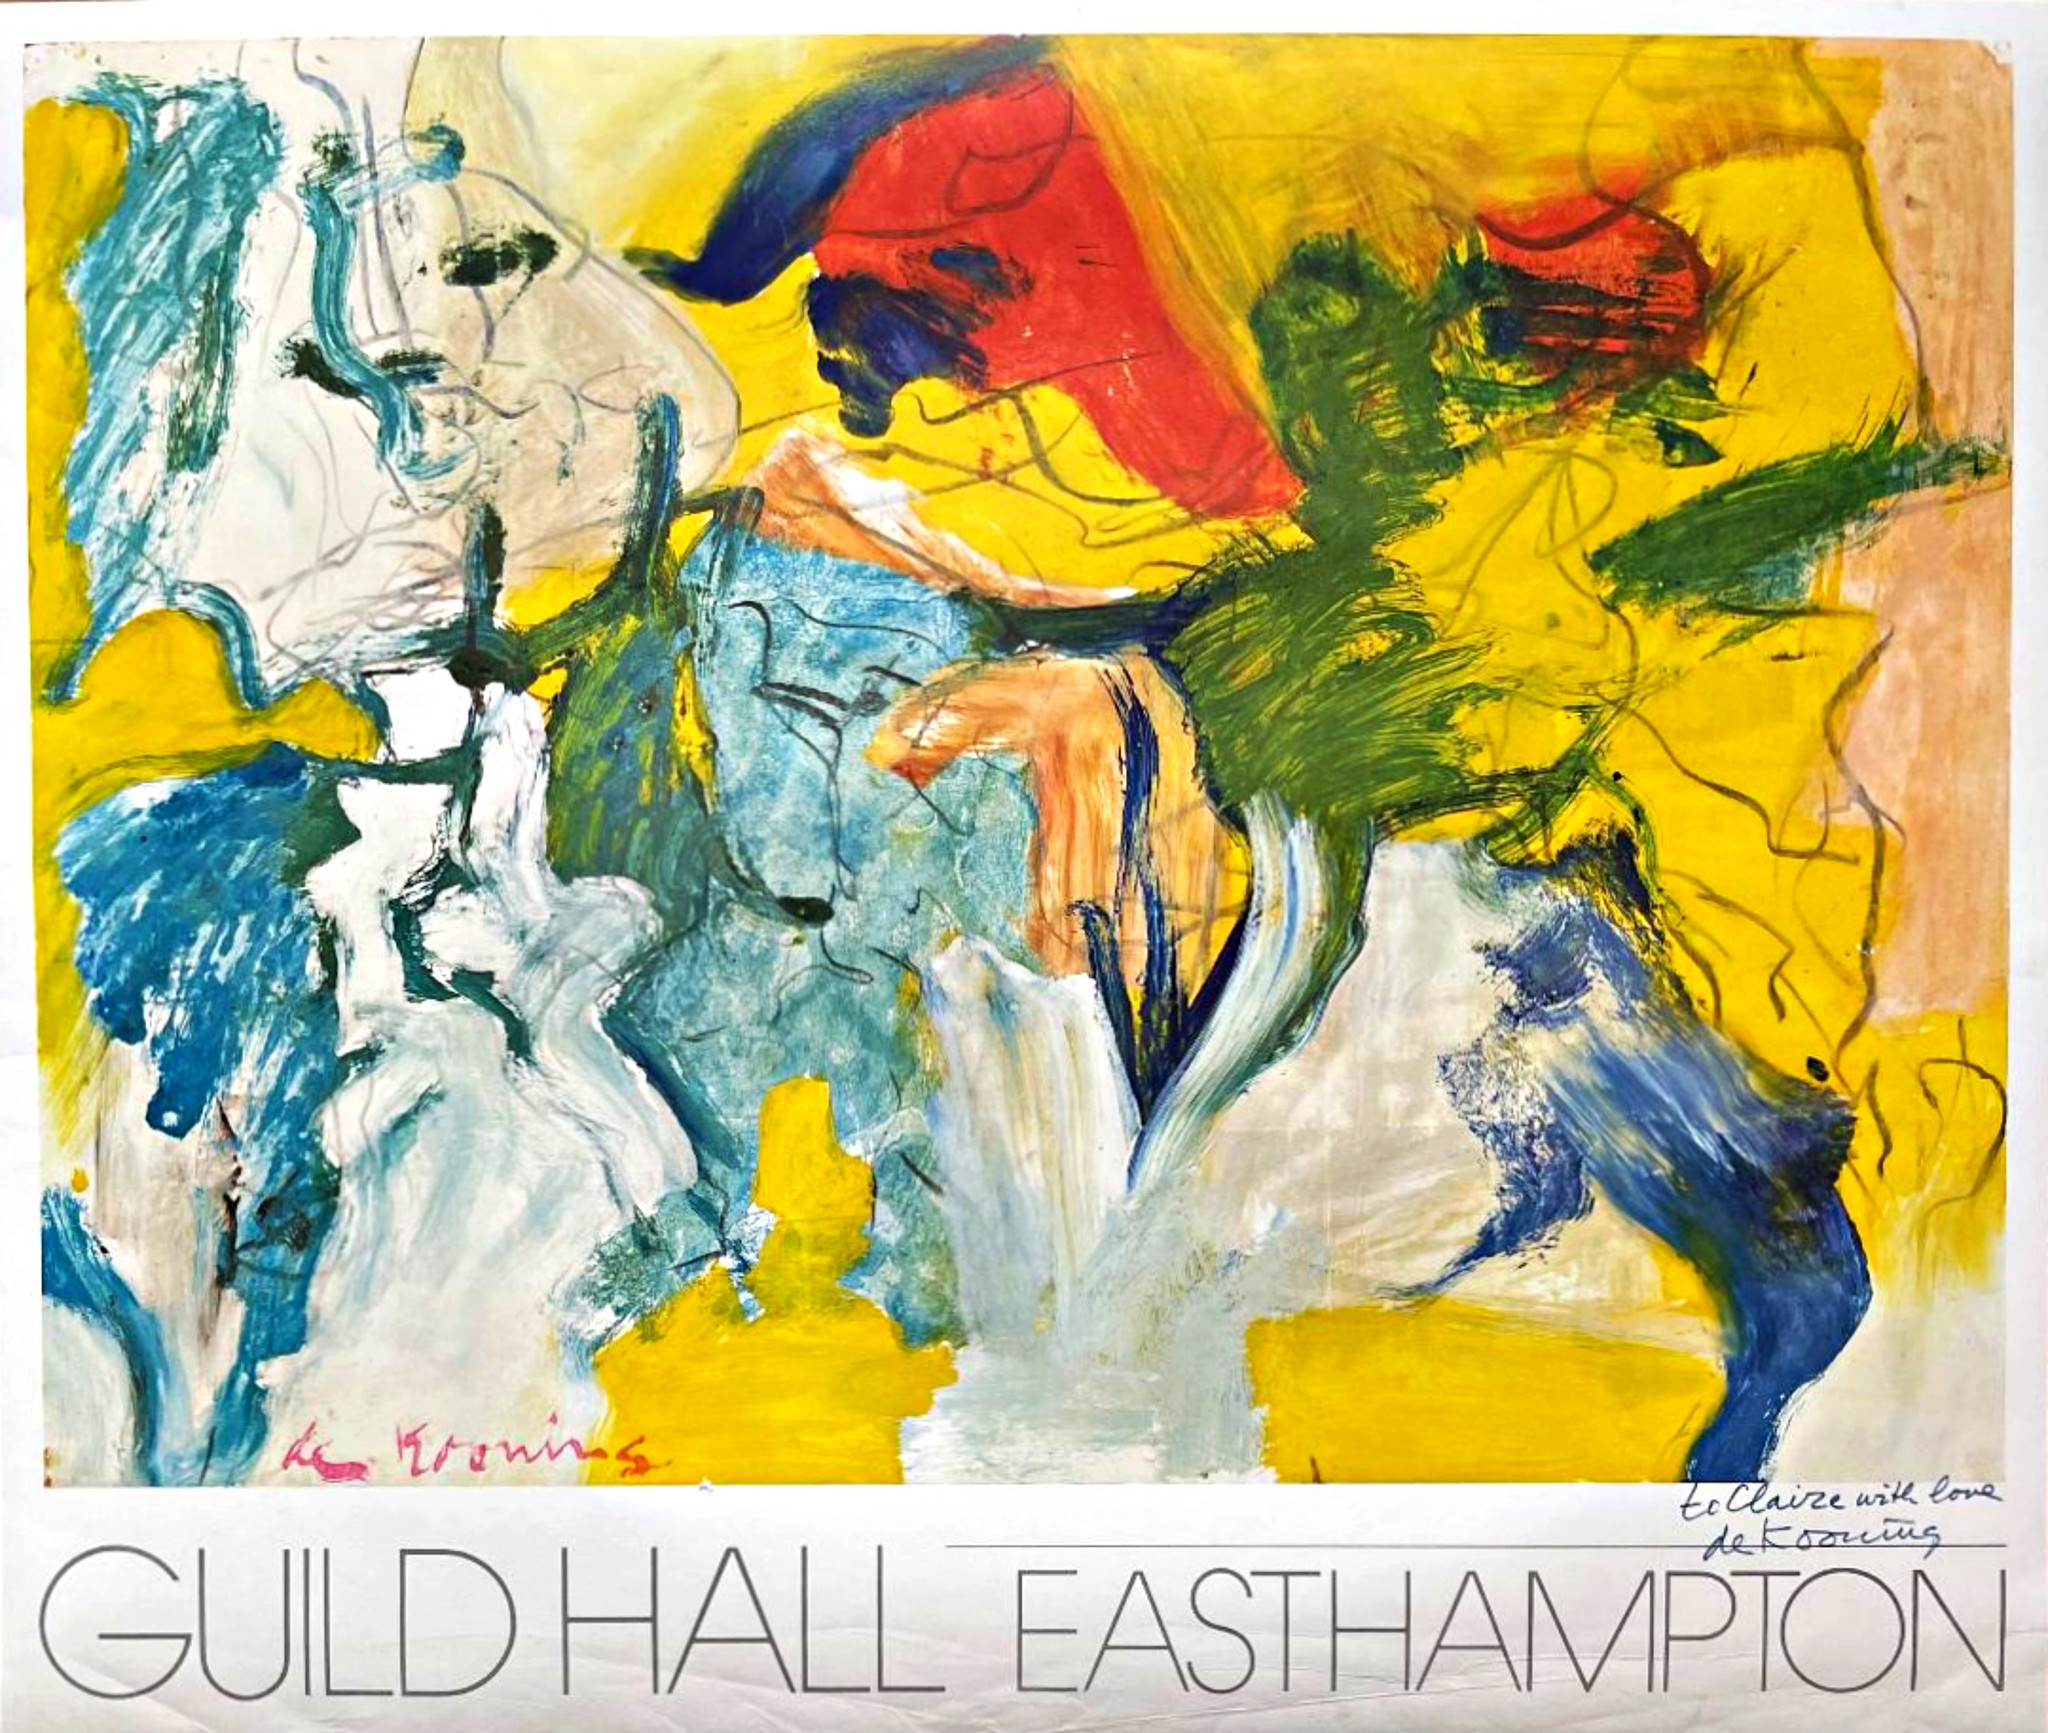 Willem de Kooning, Guild Hall, hand signed and inscribed to Claire